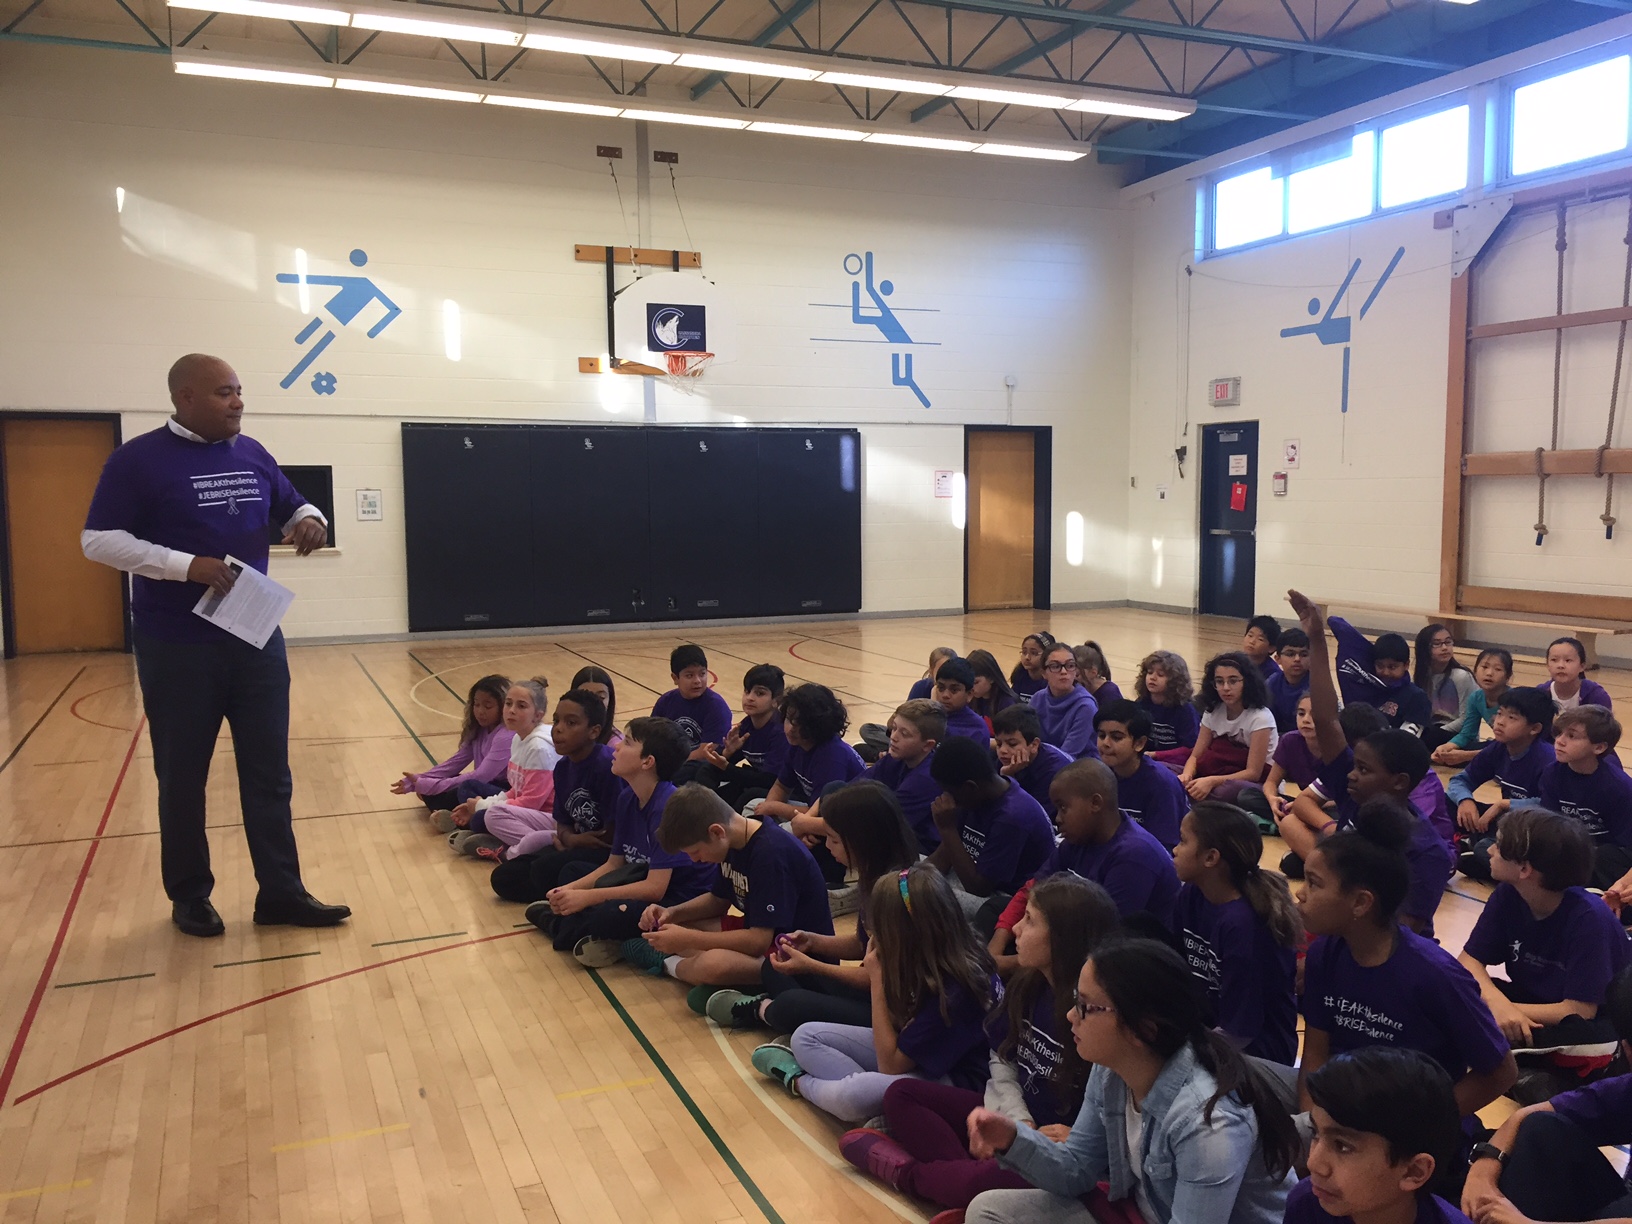 DRESS PURPLE DAY 2017: OACAS and CASs work with schools to raise awareness about child abuse prevention